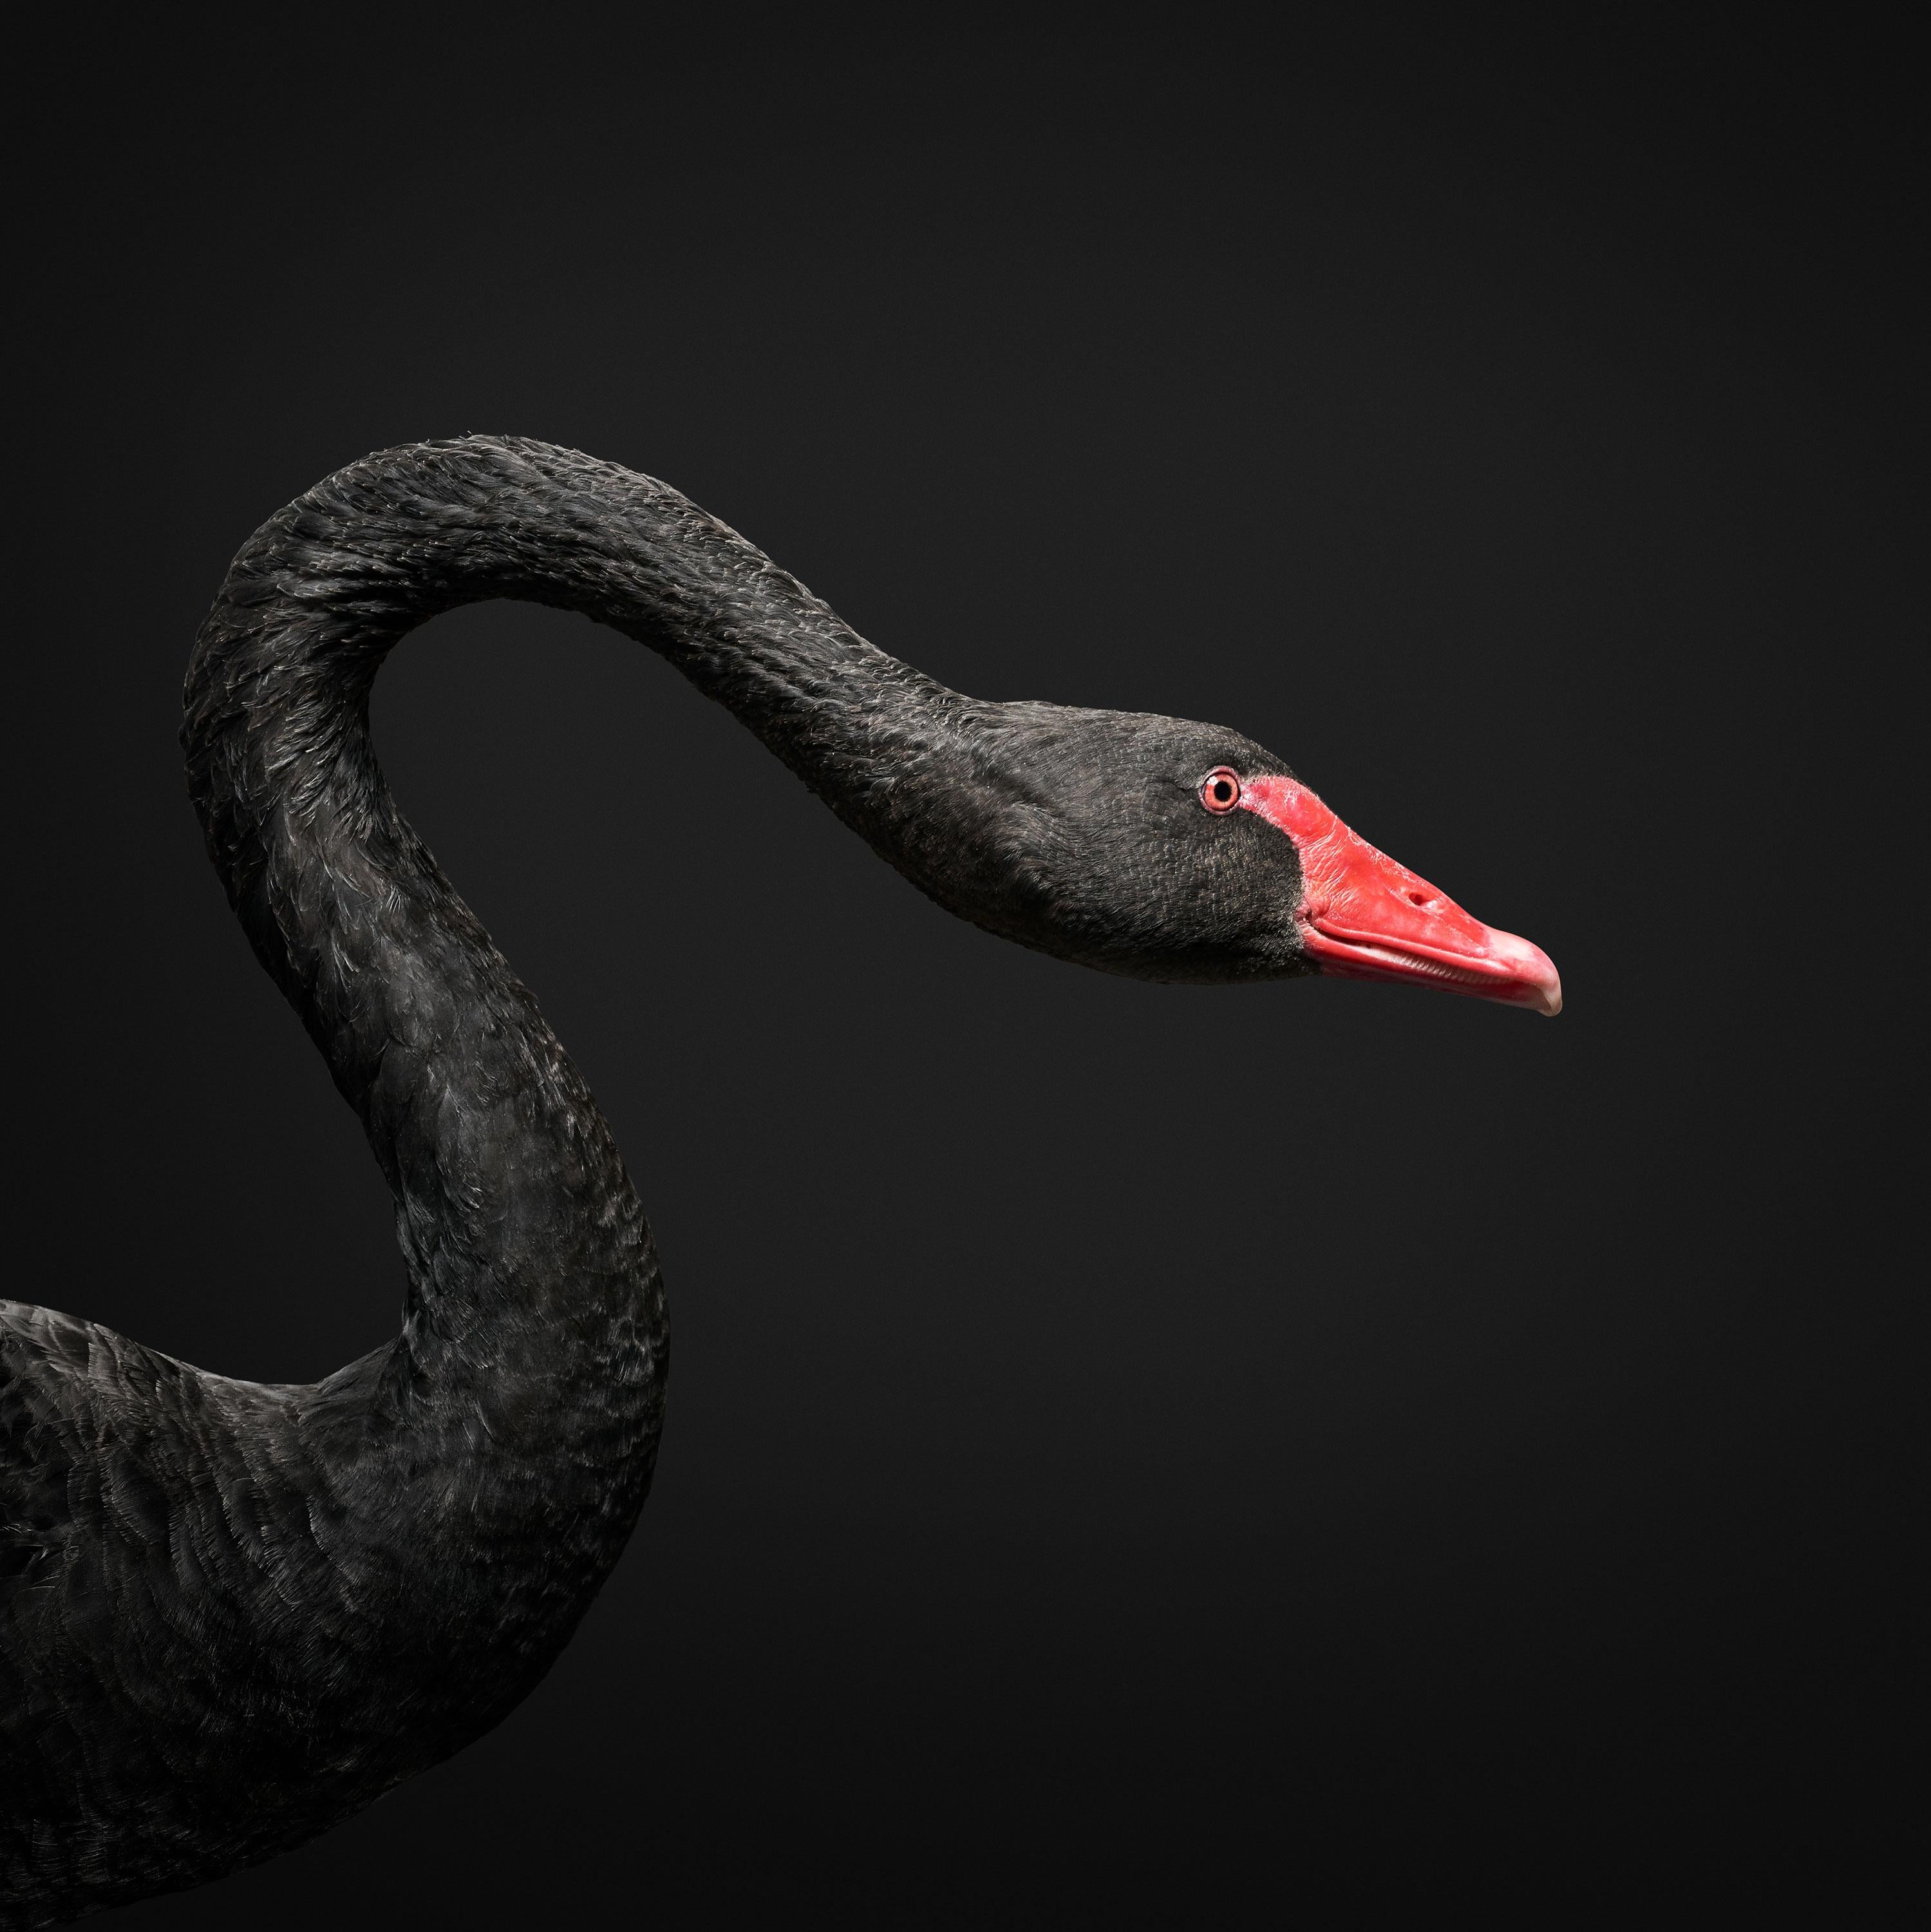 Randal Ford - Black Swan No. 2, Photography 2018, Printed After